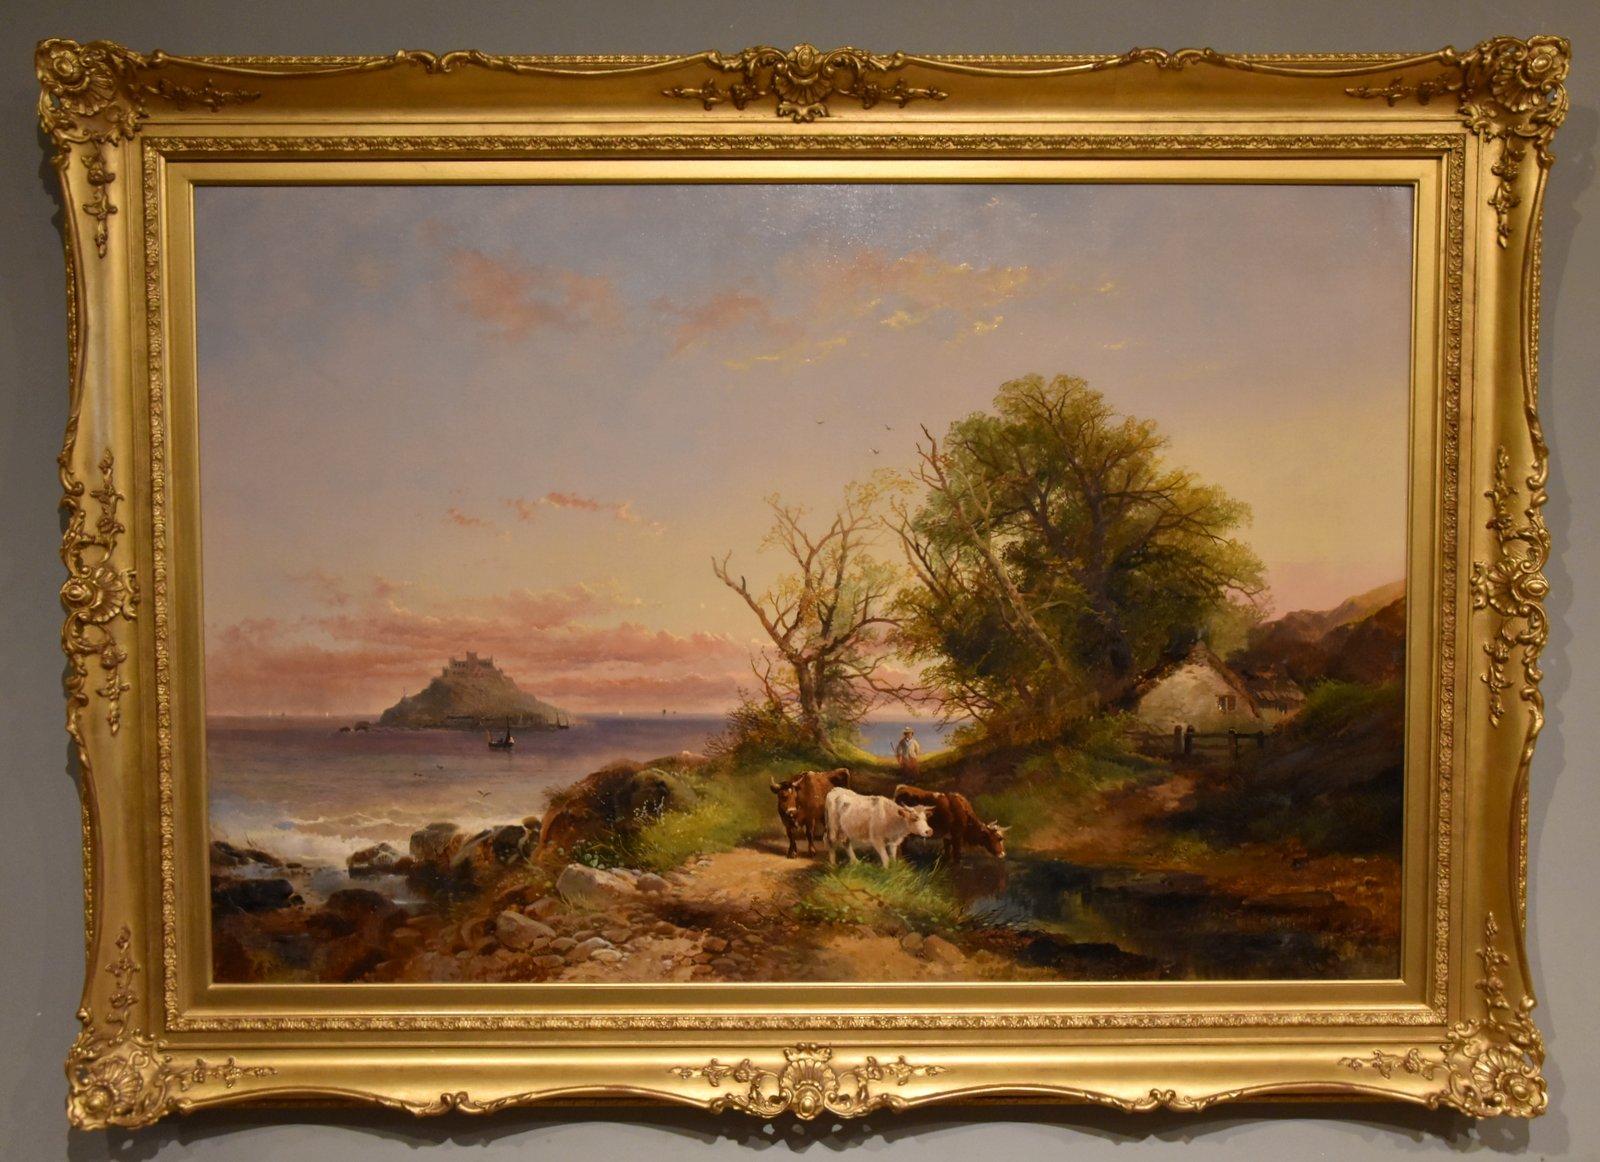 Oil Painting by Joseph Horlor  "A View of St Michaels Mount"  Joseph Horlor 1809-1887 was a Bristol painter of rustic and coastal landscapes, he exhibited at the Royal Society and British institution. Oil on canvas. Signed

Dimensions unframed 28x